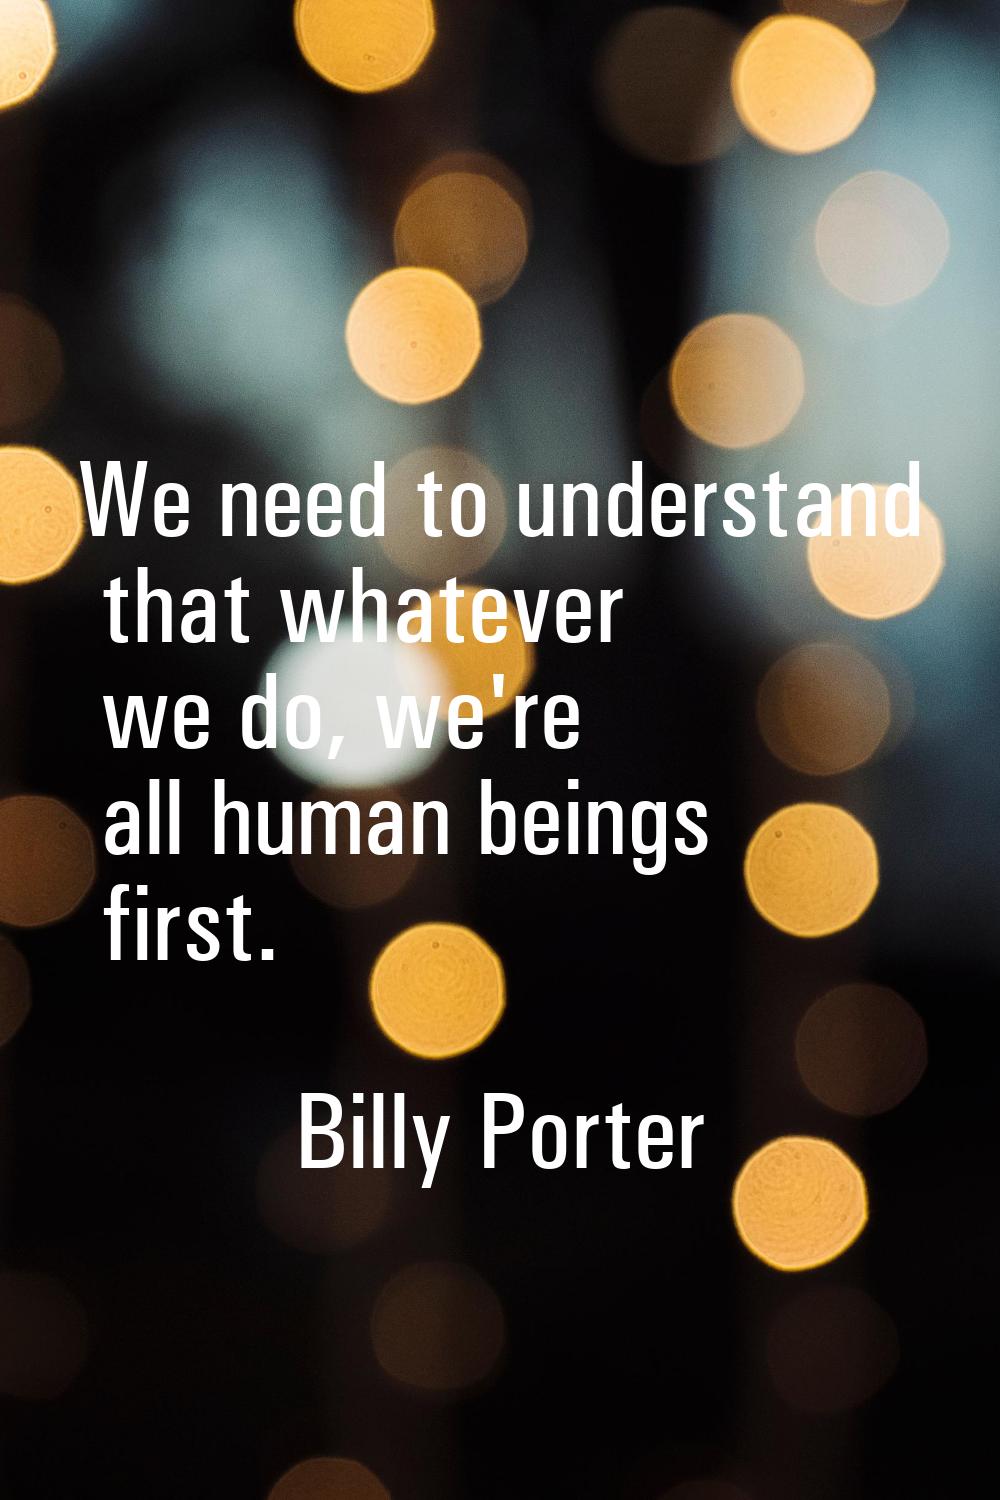 We need to understand that whatever we do, we're all human beings first.